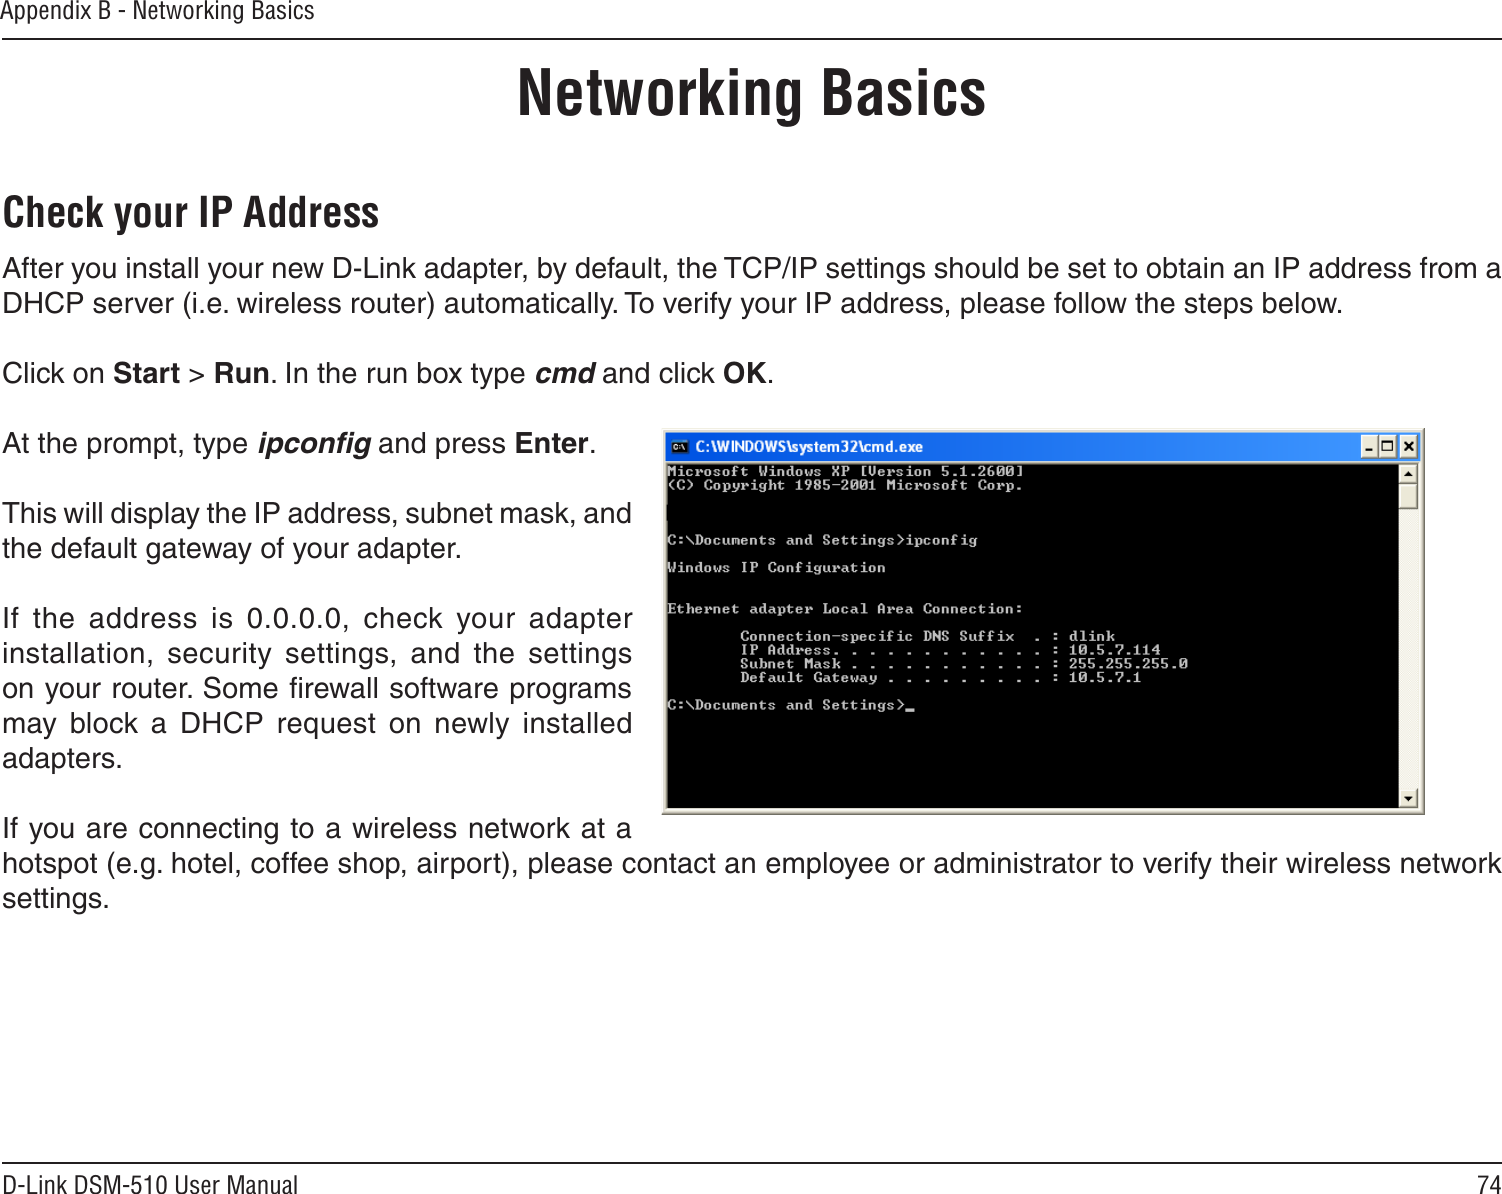 74D-Link DSM-510 User ManualAppendix B - Networking BasicsNetworking BasicsCheck your IP AddressAfter you install your new D-Link adapter, by default, the TCP/IP settings should be set to obtain an IP address from a DHCP server (i.e. wireless router) automatically. To verify your IP address, please follow the steps below.Click on Start &gt; Run. In the run box type cmd and click OK.At the prompt, type ipconﬁg and press Enter.This will display the IP address, subnet mask, and the default gateway of your adapter.If  the  address  is  0.0.0.0,  check  your  adapter installation,  security  settings,  and  the  settings on your router. Some ﬁrewall software programs may  block  a  DHCP  request  on  newly  installed adapters. If you are connecting to a wireless network at a hotspot (e.g. hotel, coffee shop, airport), please contact an employee or administrator to verify their wireless network settings.